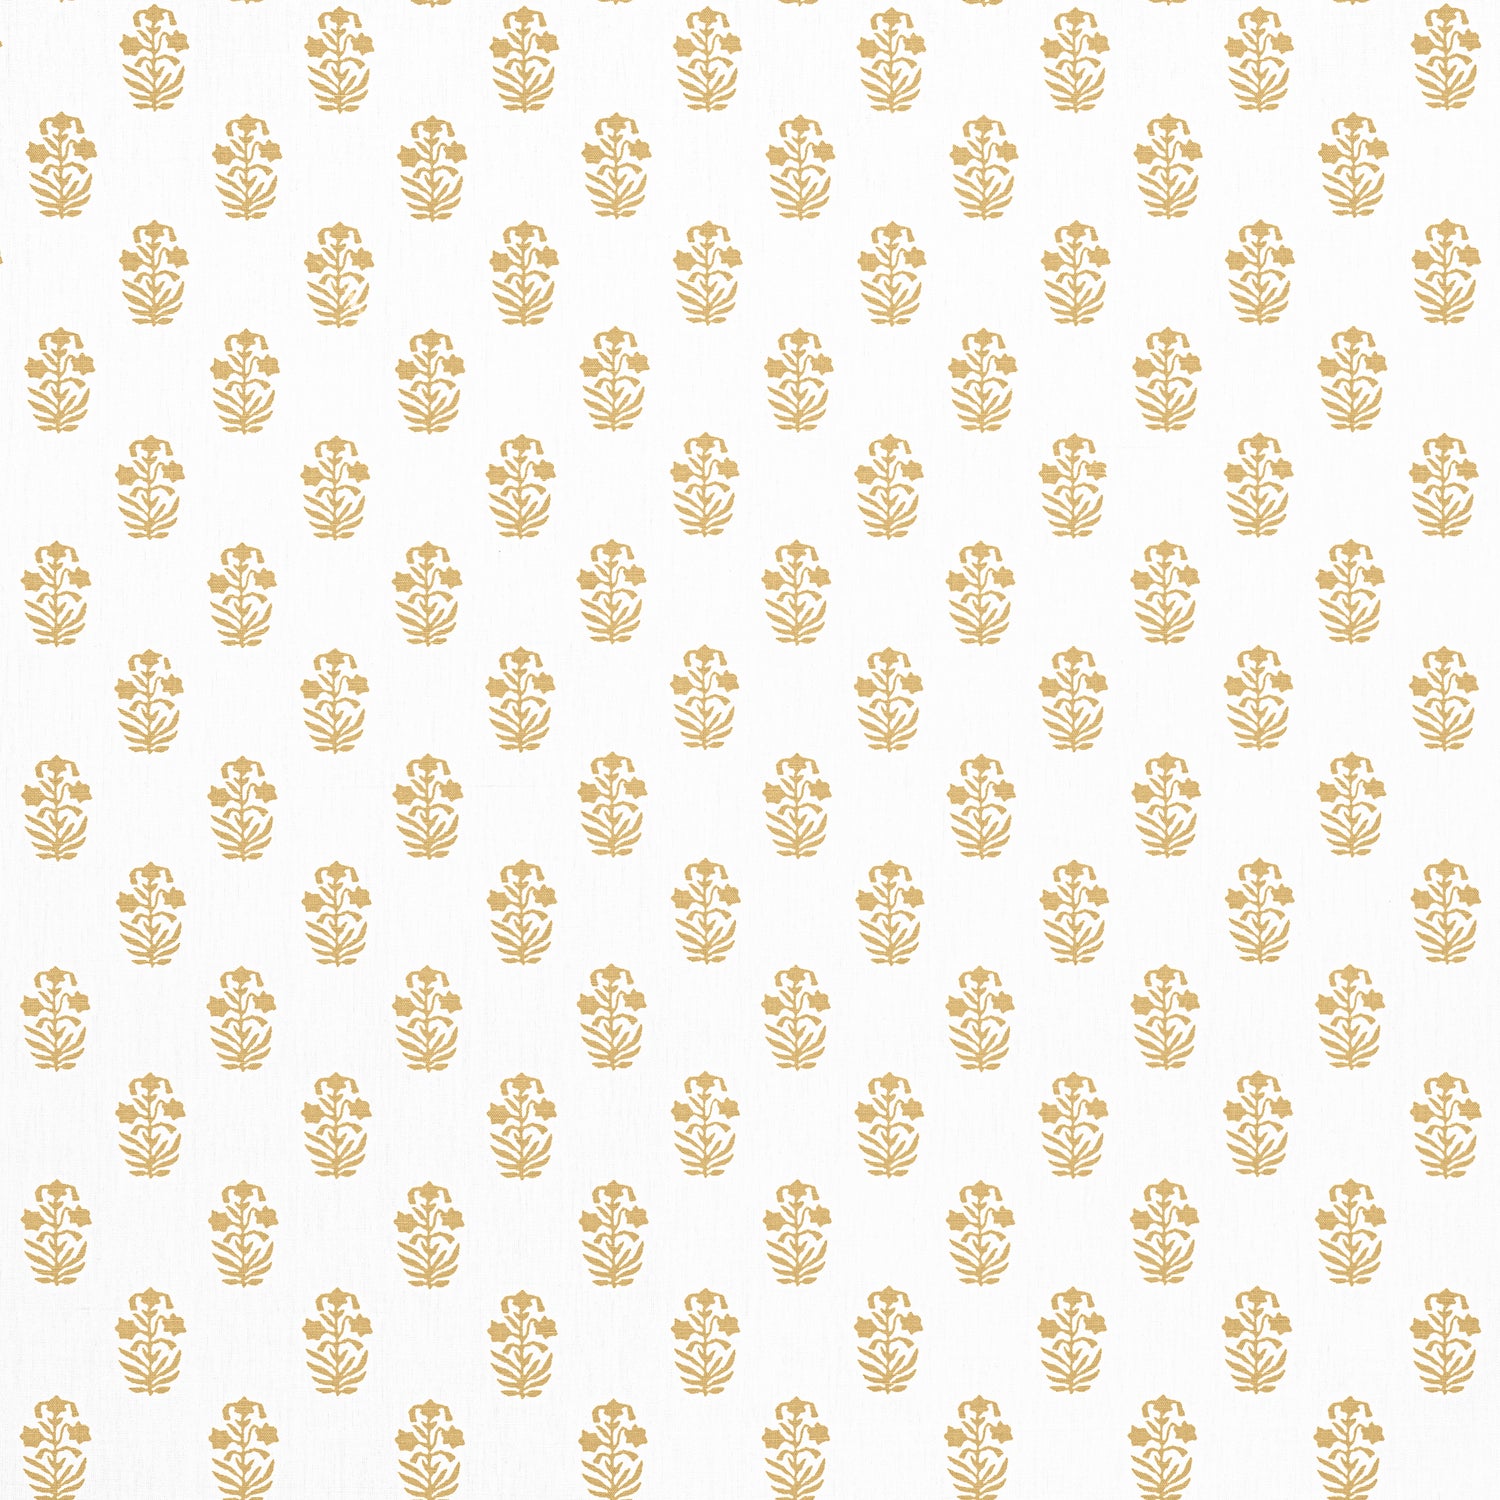 Corwin fabric in gold on white color - pattern number F936404 - by Thibaut in the Indienne collection